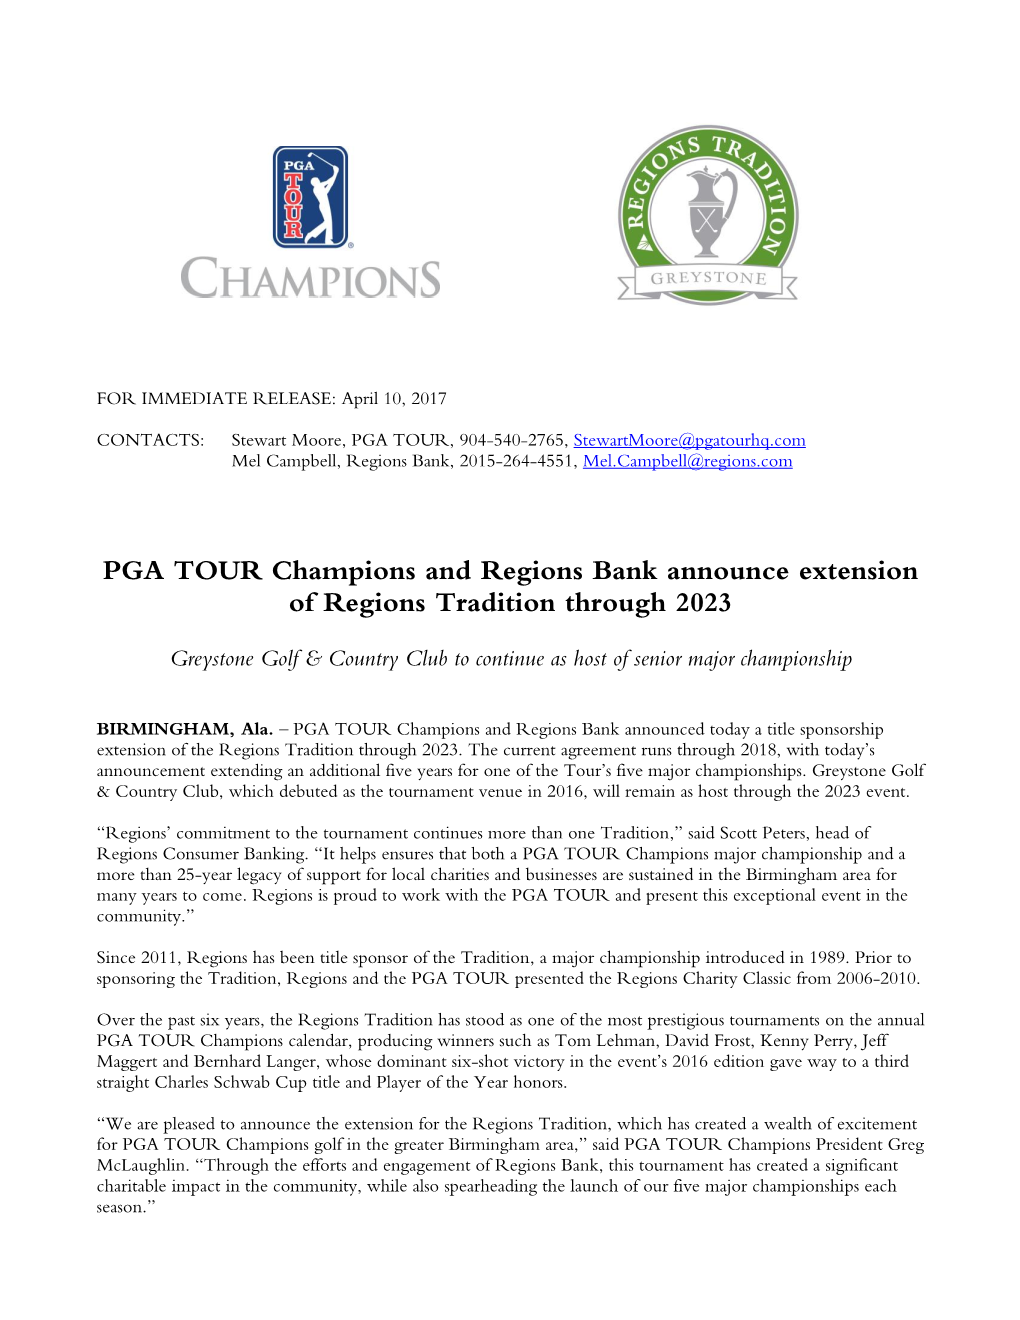 PGA TOUR Champions and Regions Bank Announce Extension of Regions Tradition Through 2023